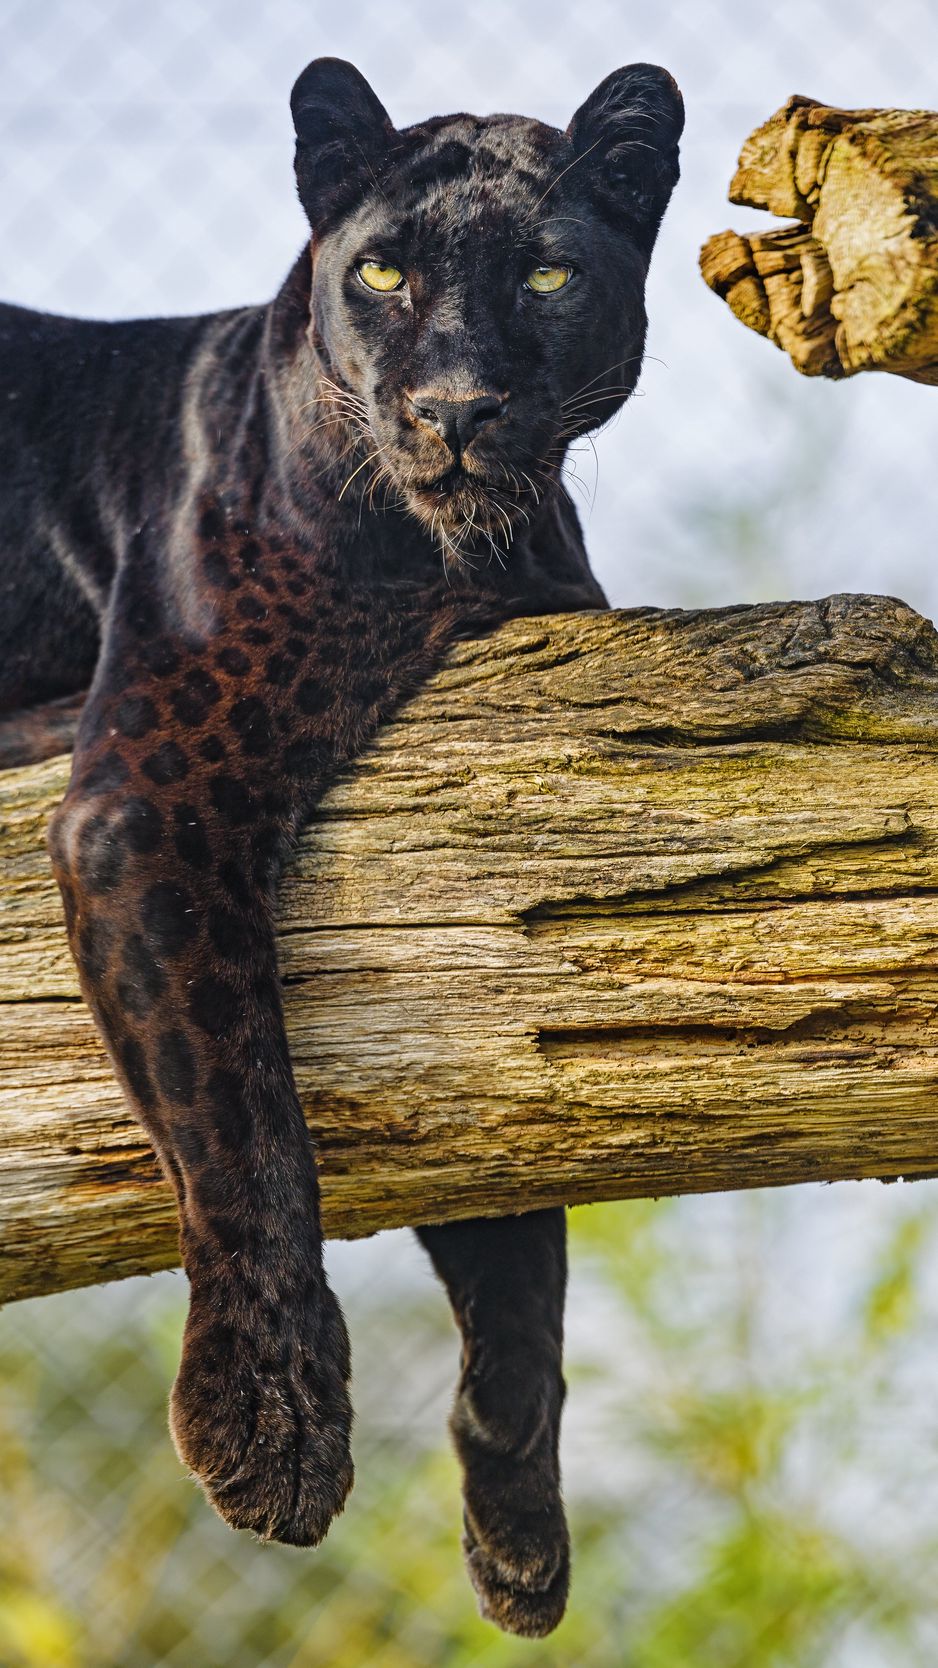 Download wallpaper 938x1668 panther, animal, big cat, predator, wild, black  iphone 8/7/6s/6 for parallax hd background